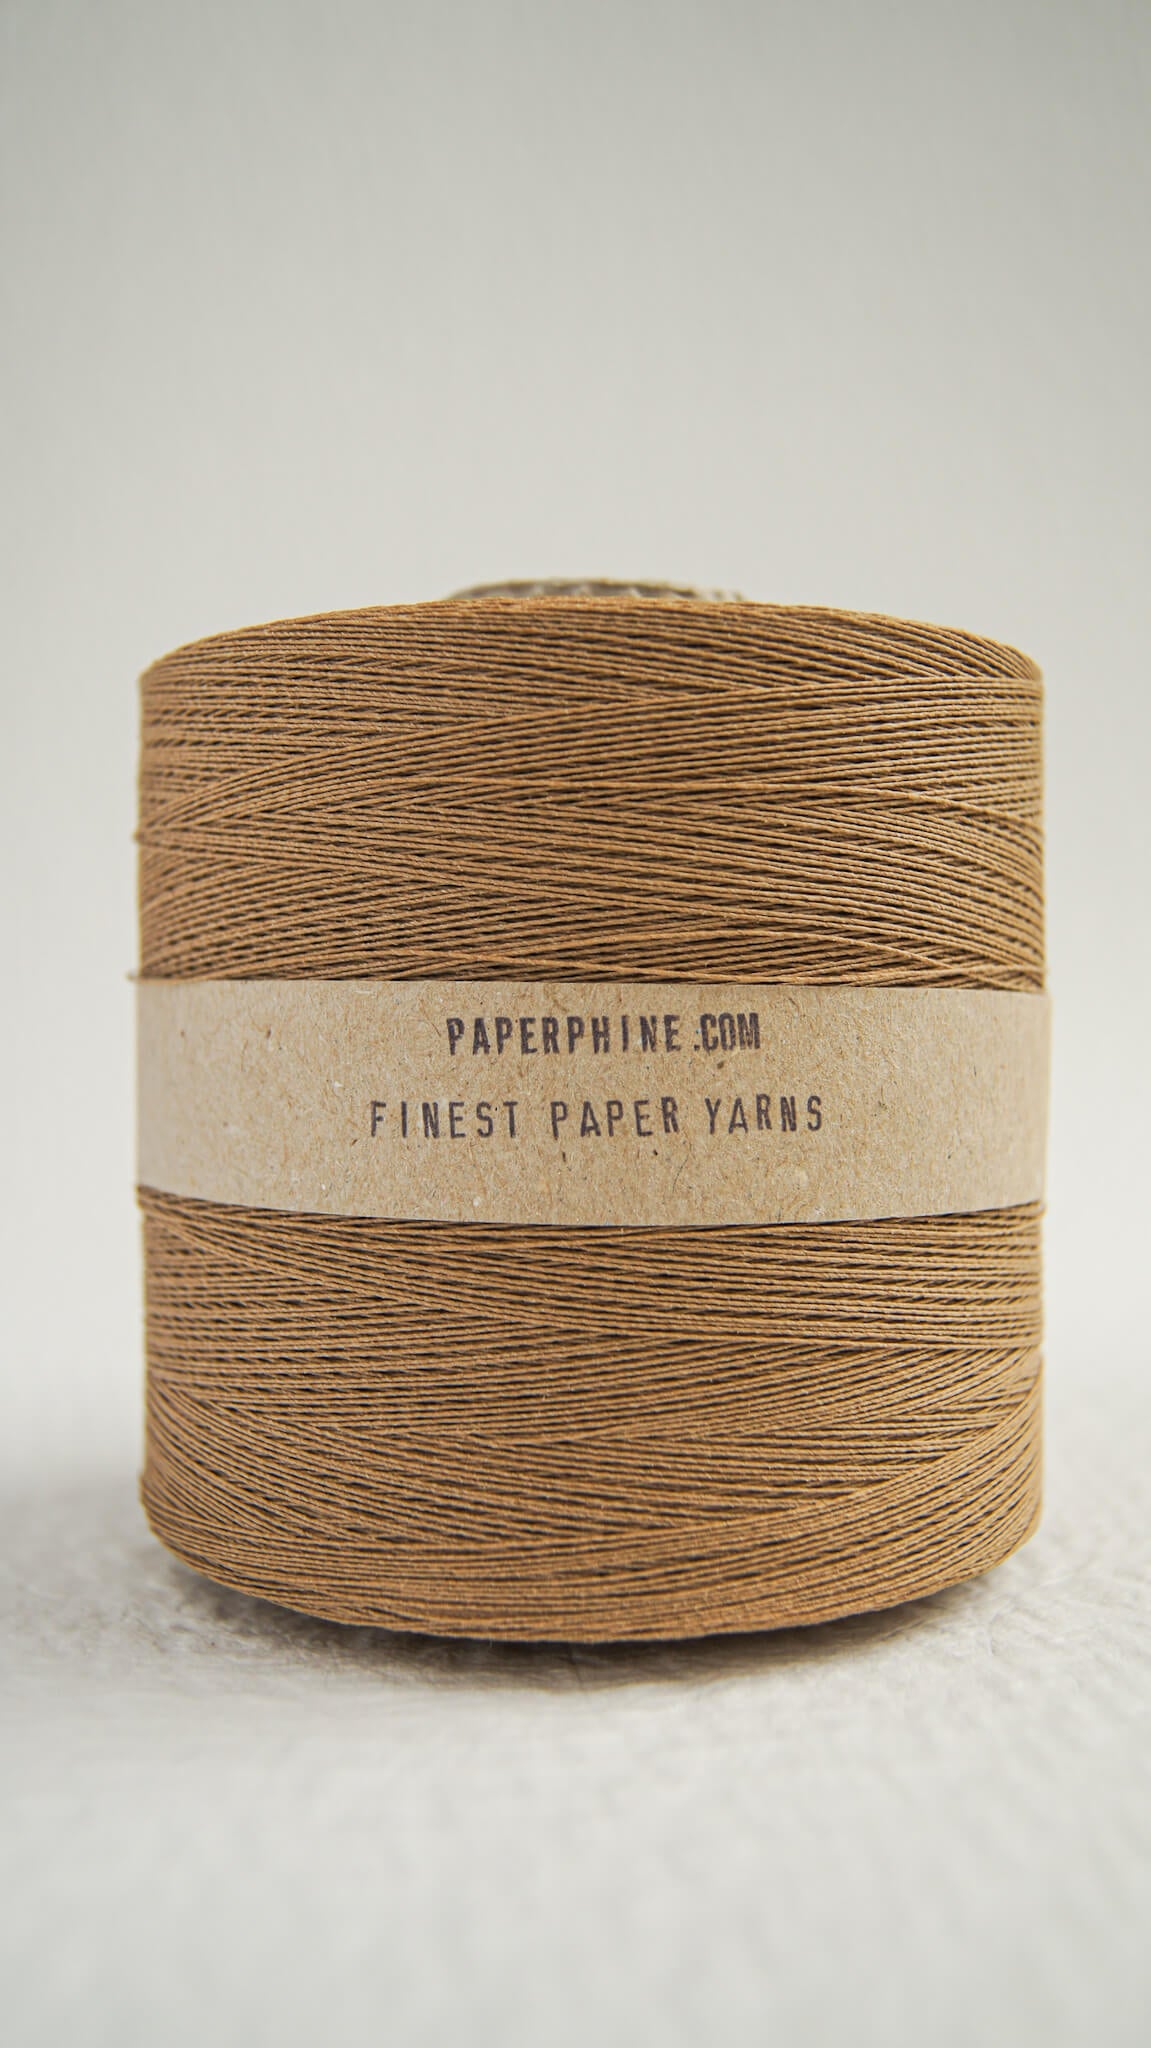 Fil de papier Paperphine - Finest paper yarn from Paperphine